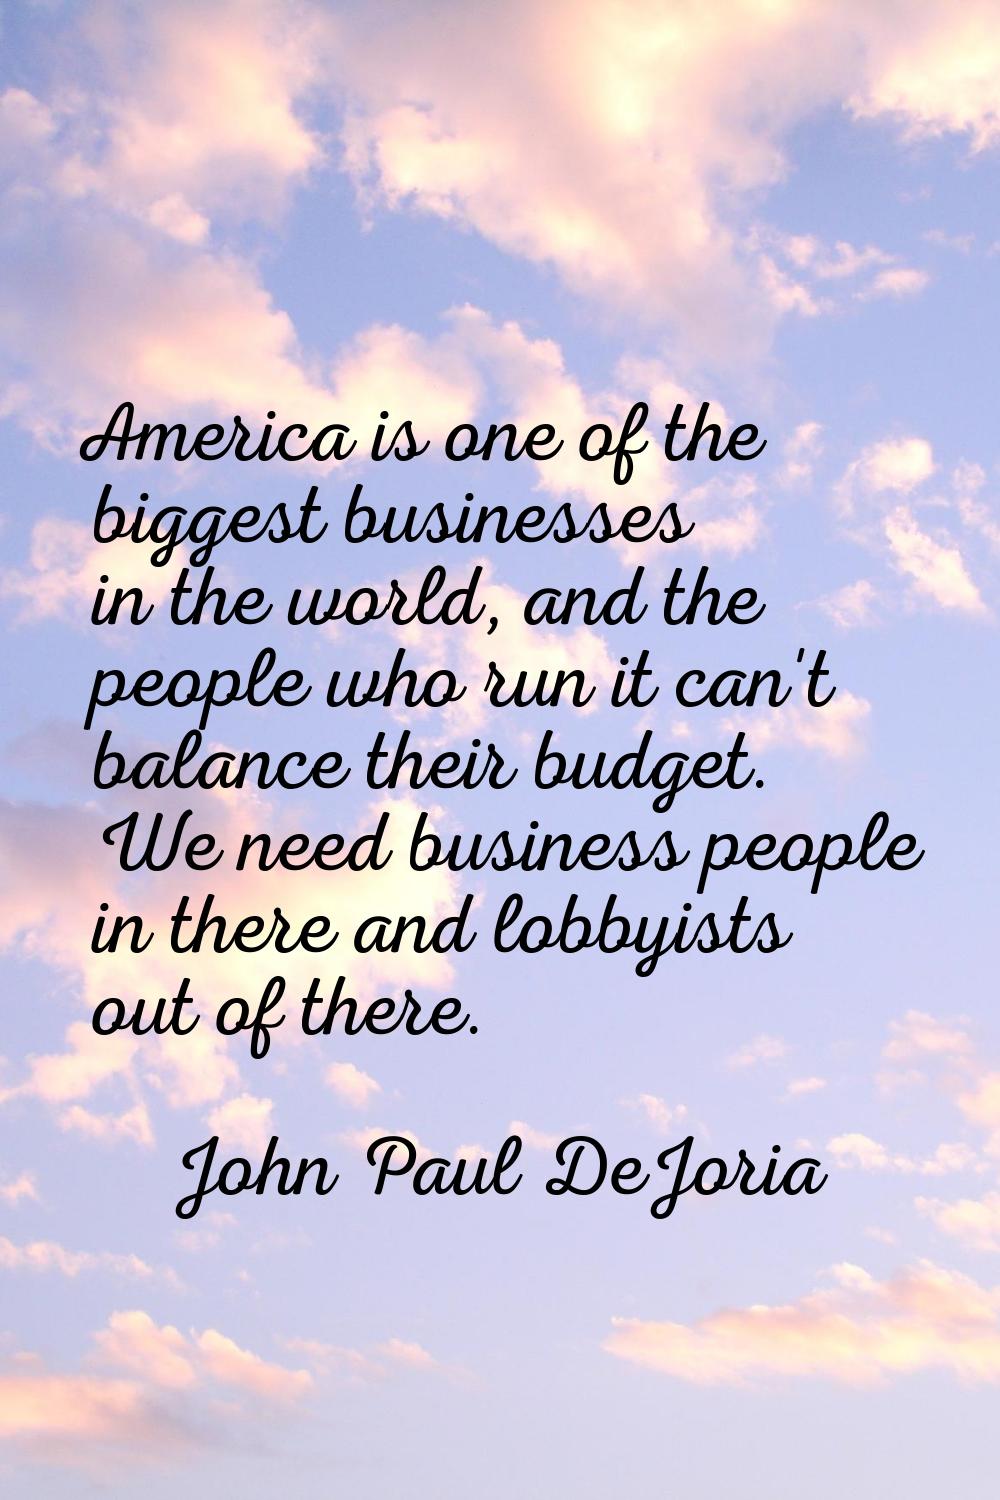 America is one of the biggest businesses in the world, and the people who run it can't balance thei